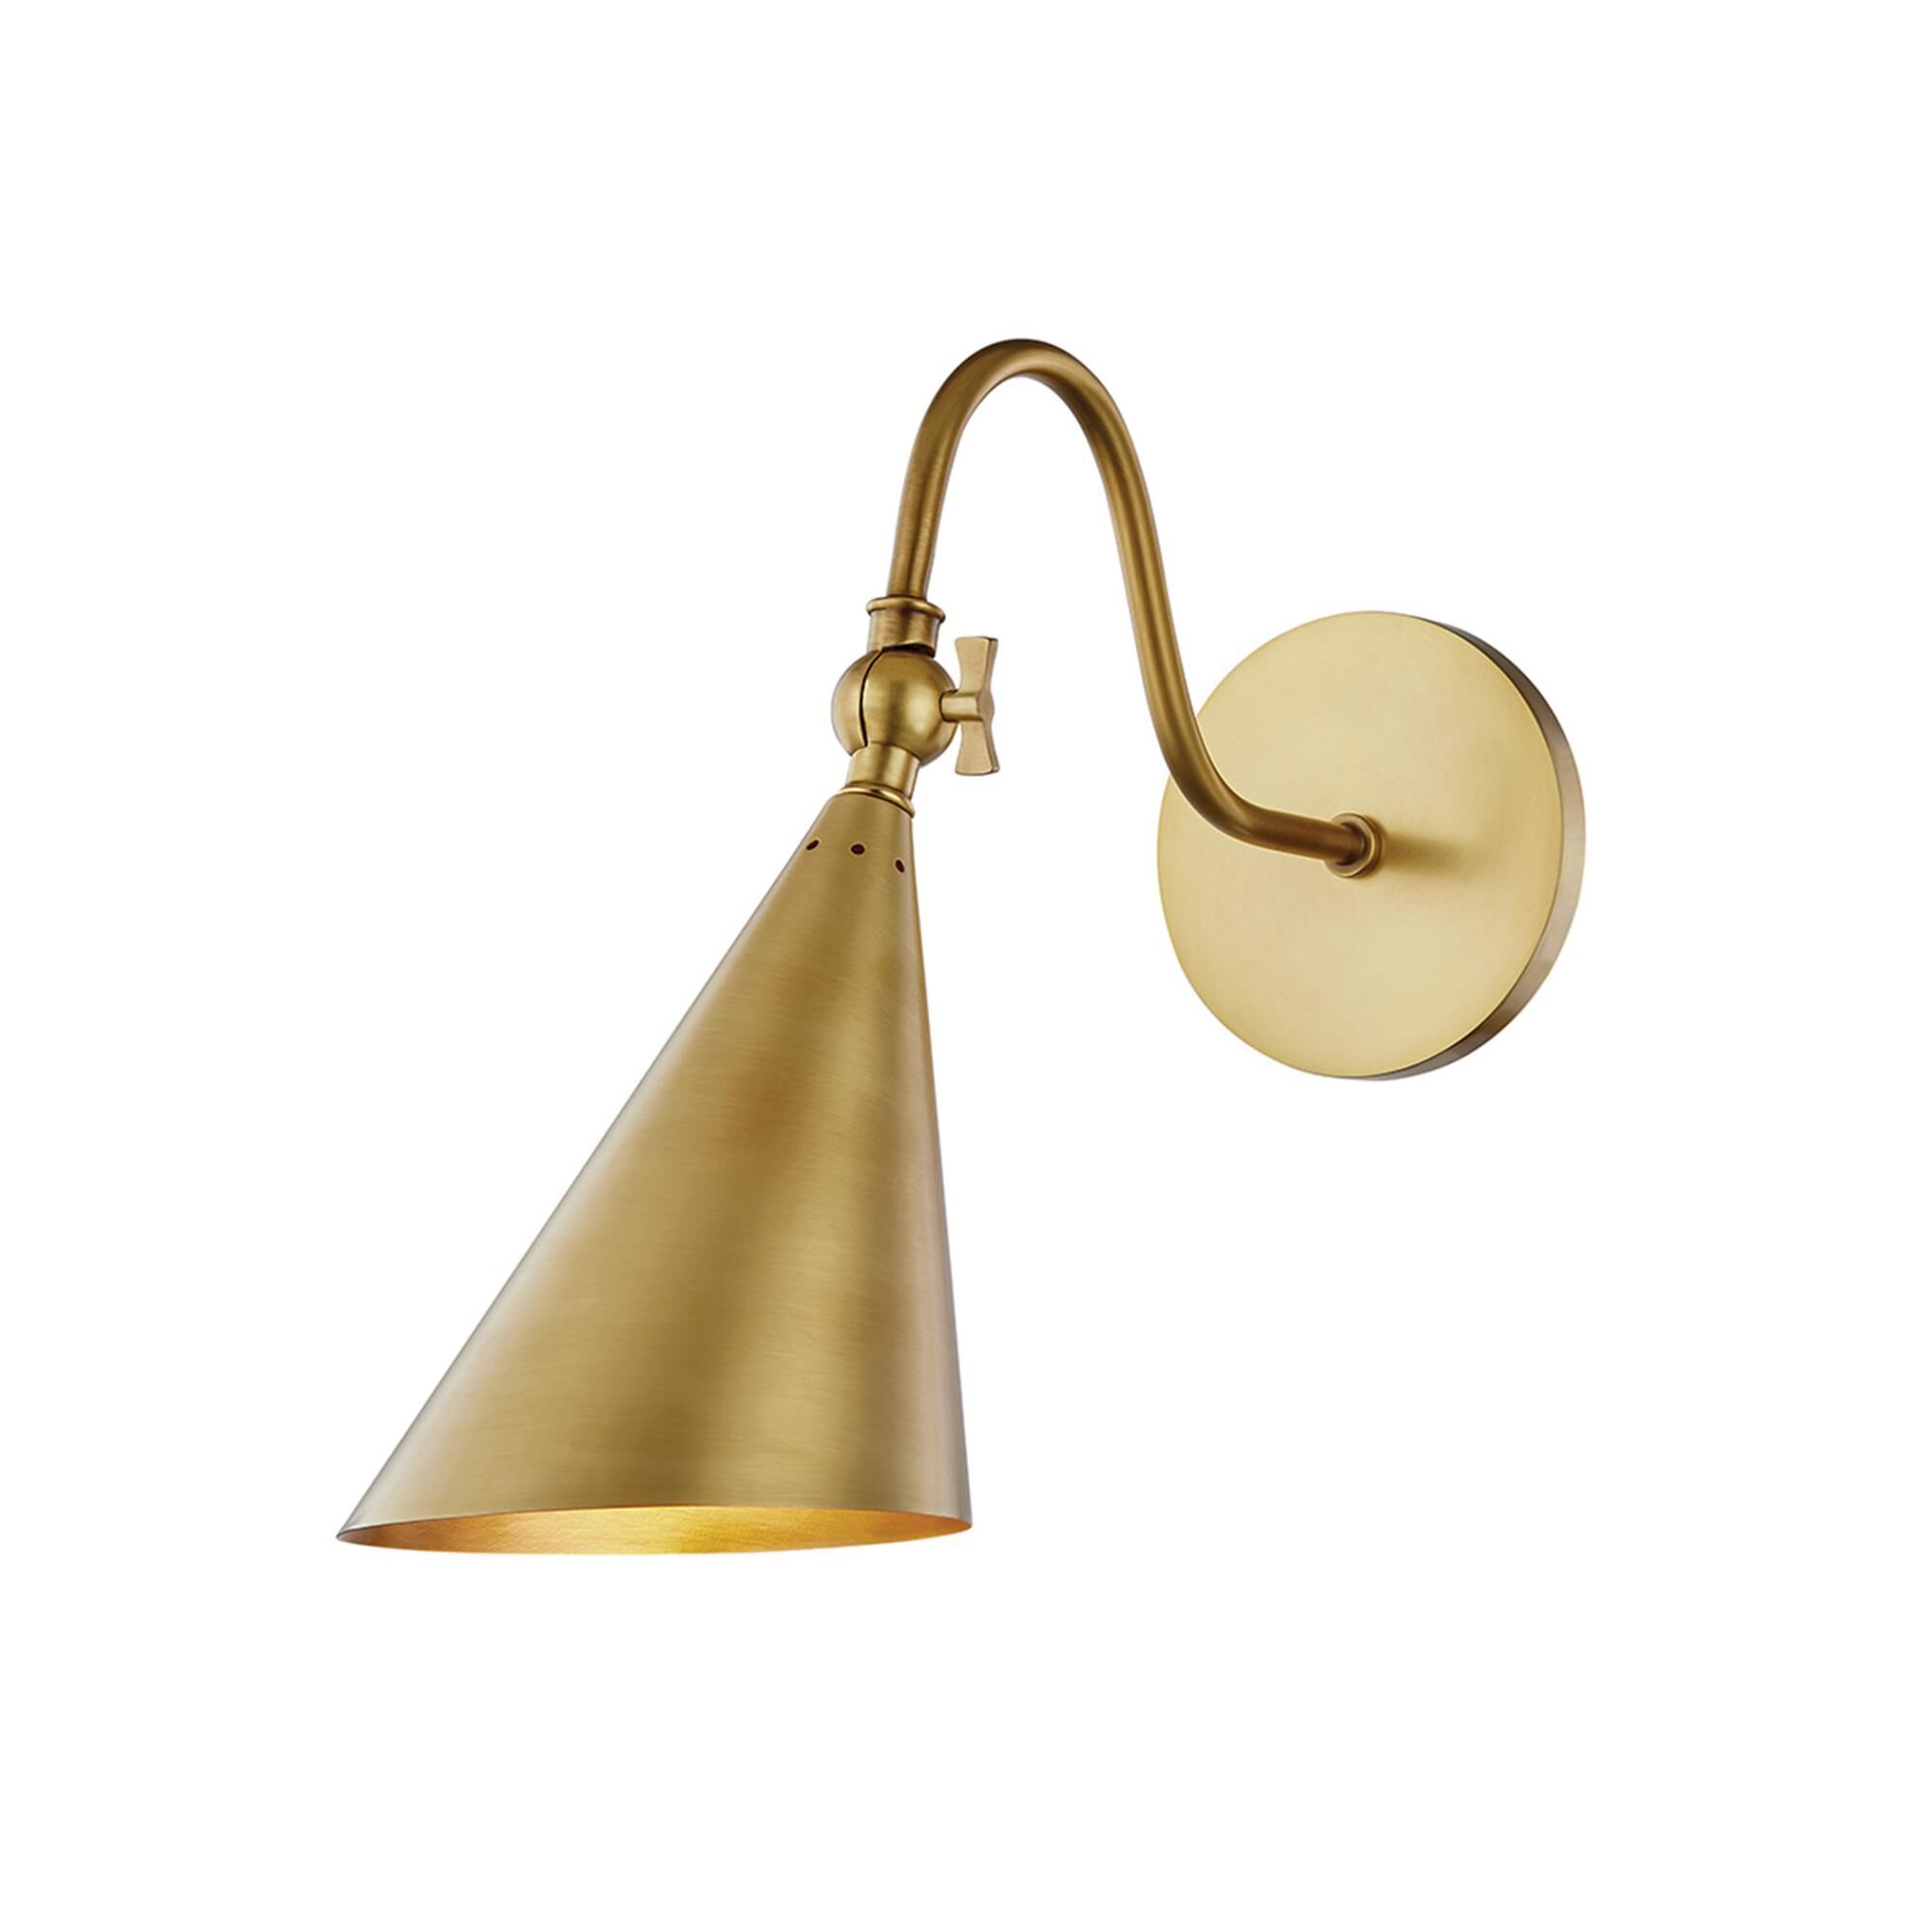 Mitzi Lupe 12 Inch Wall Sconce | 1800 Lighting